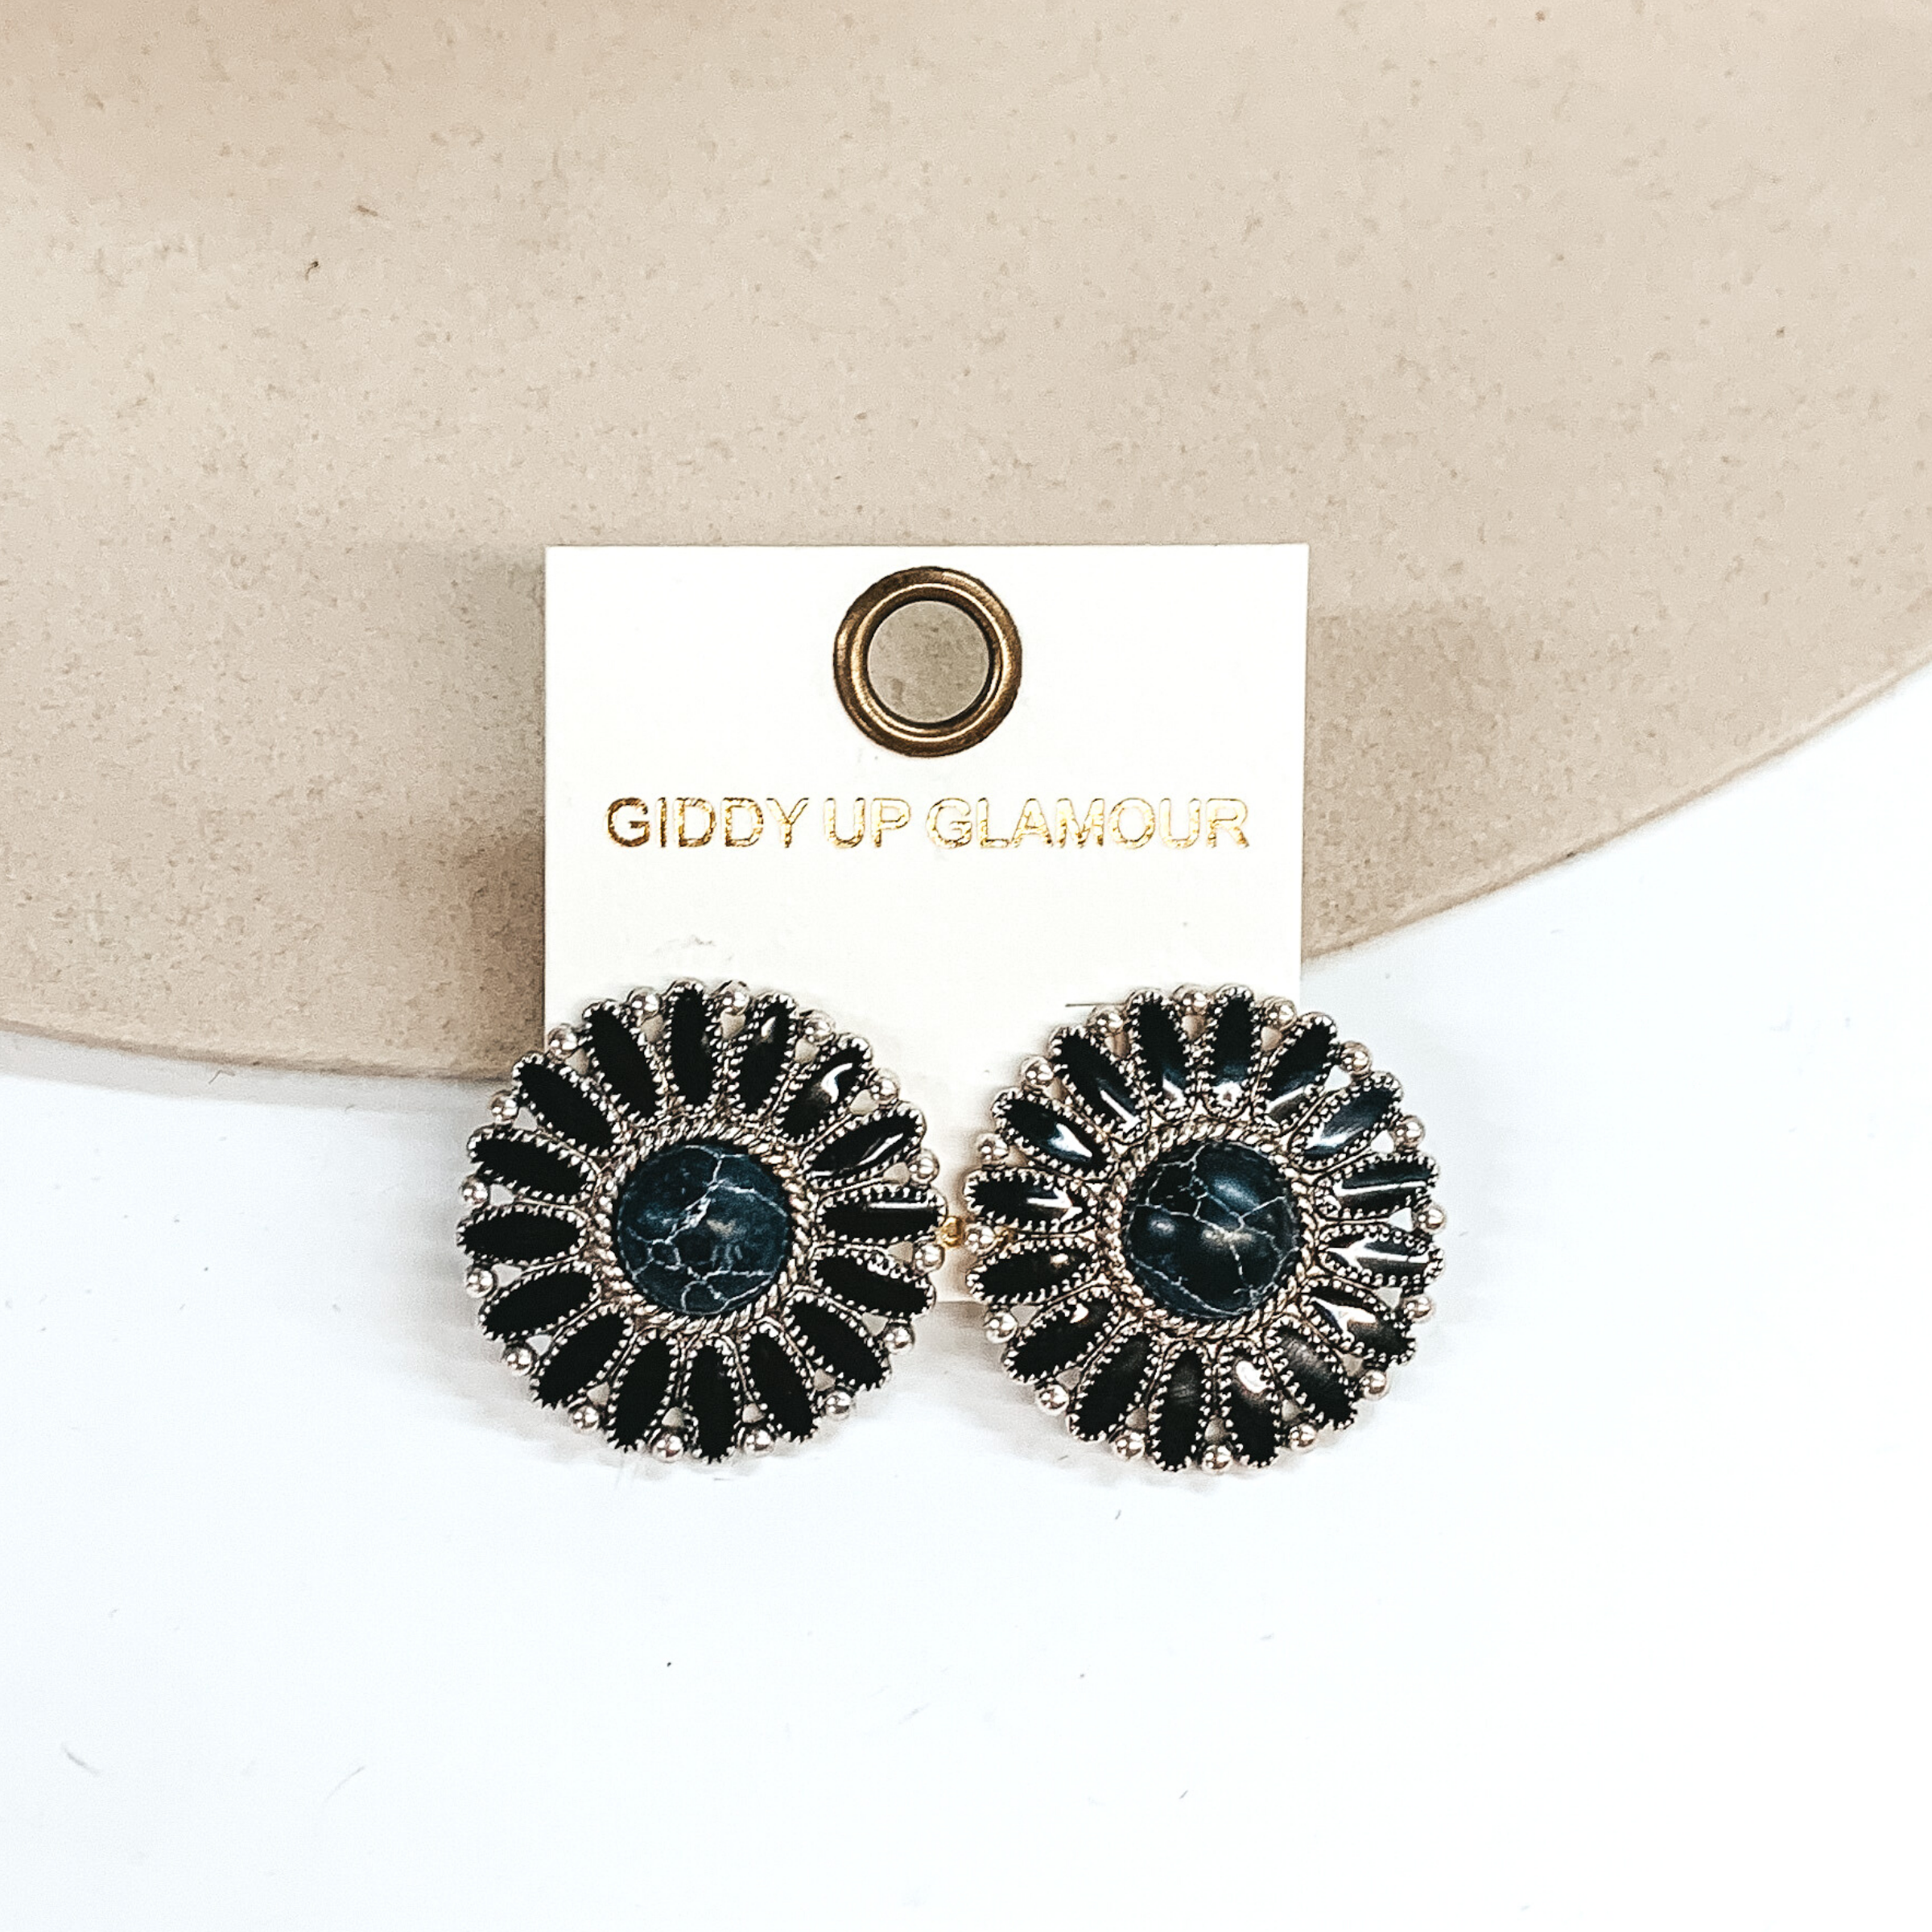 Black concho earrings with a center black stone and silver outline. These earrings are pictured on a white and ivory background.